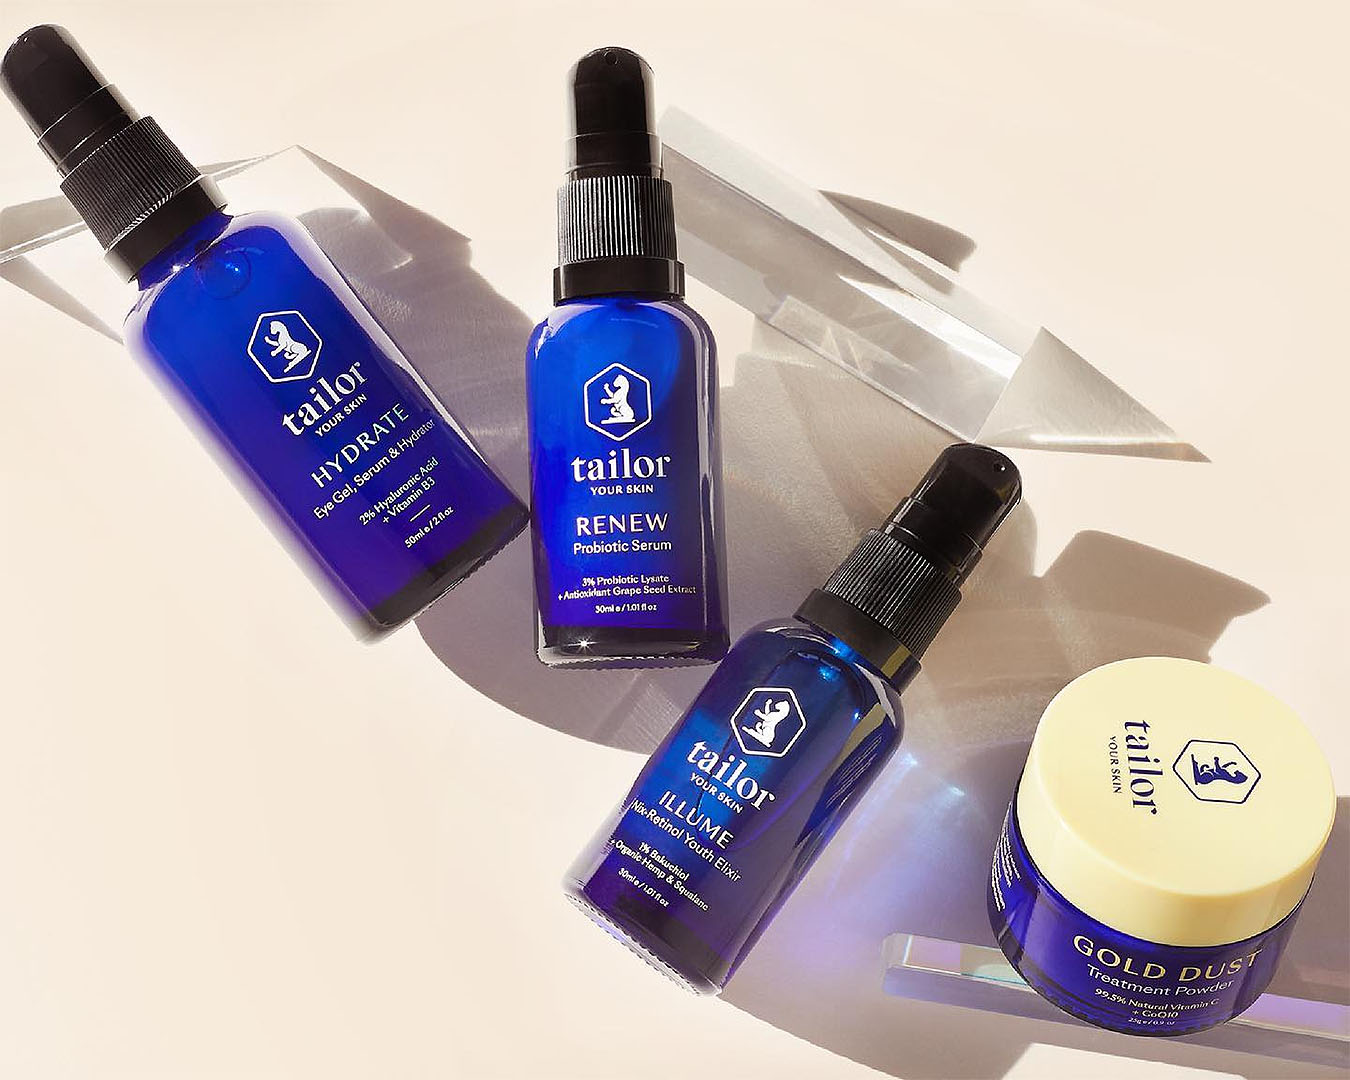 Tailor skincare products including Hydrate, Renew, Illume and Gold Dust.